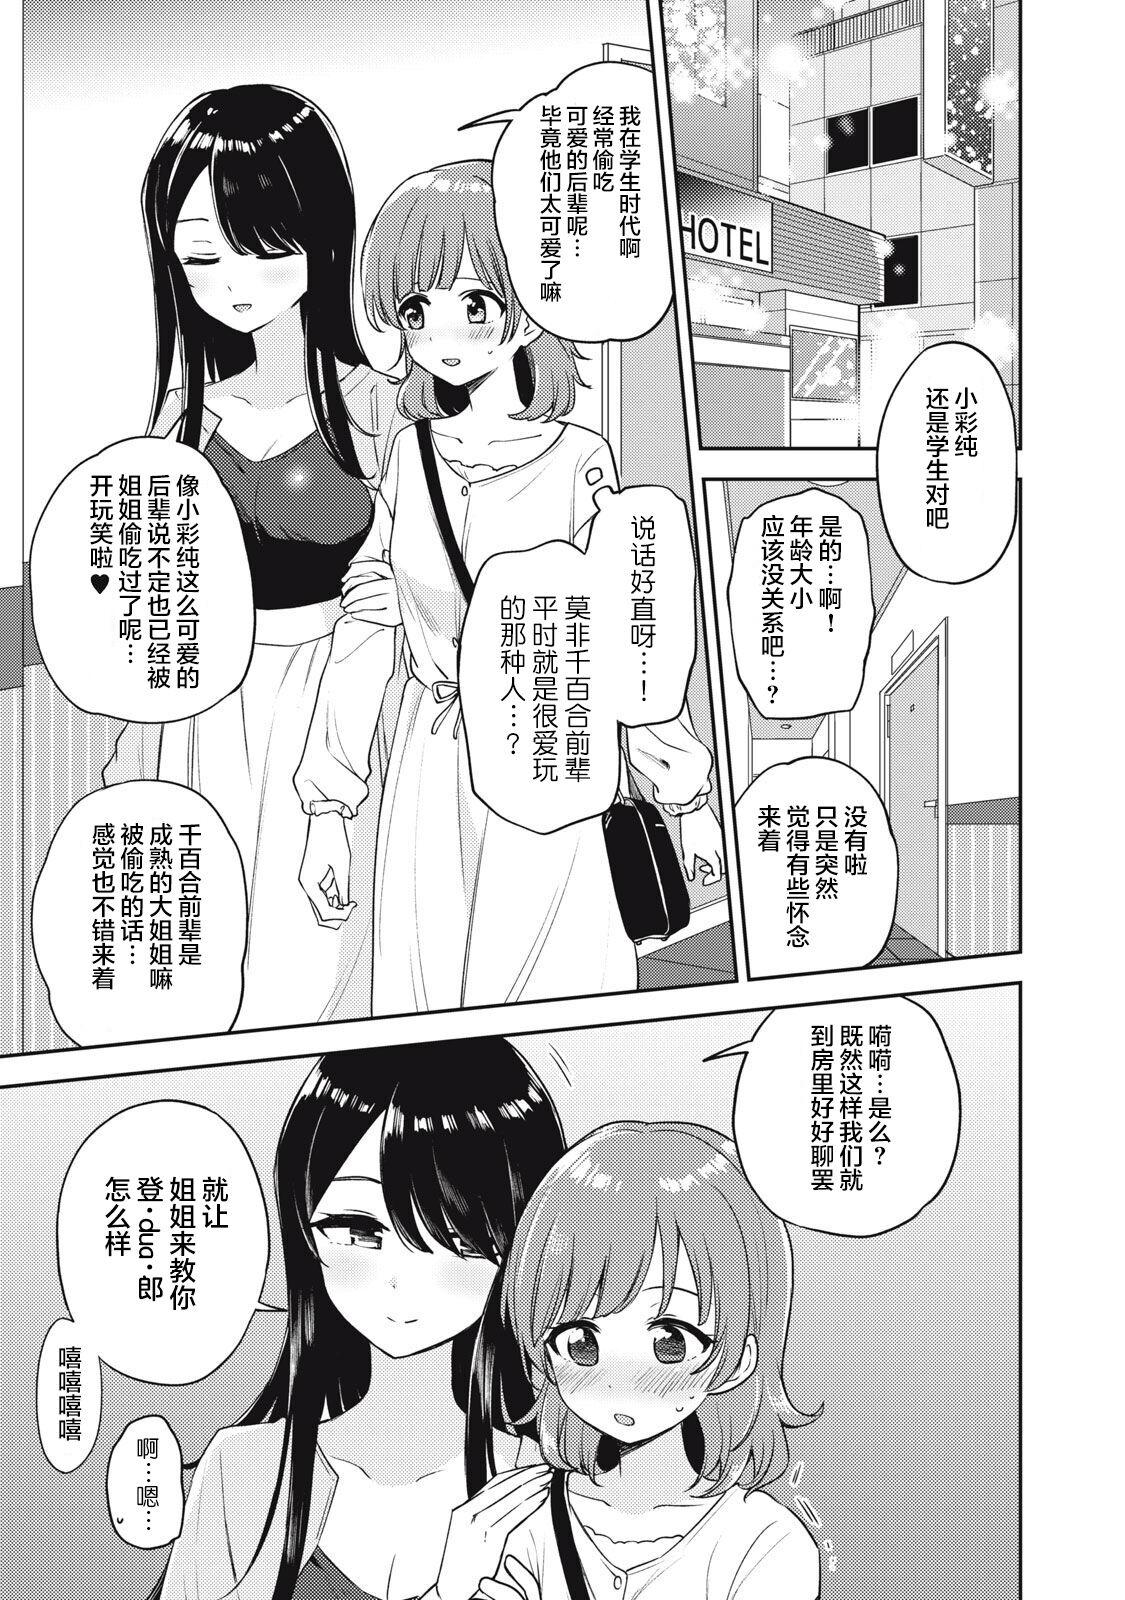 Facesitting Asumi-chan Is Interested In Lesbian Brothels! Extra Episode Seduction Porn - Page 3